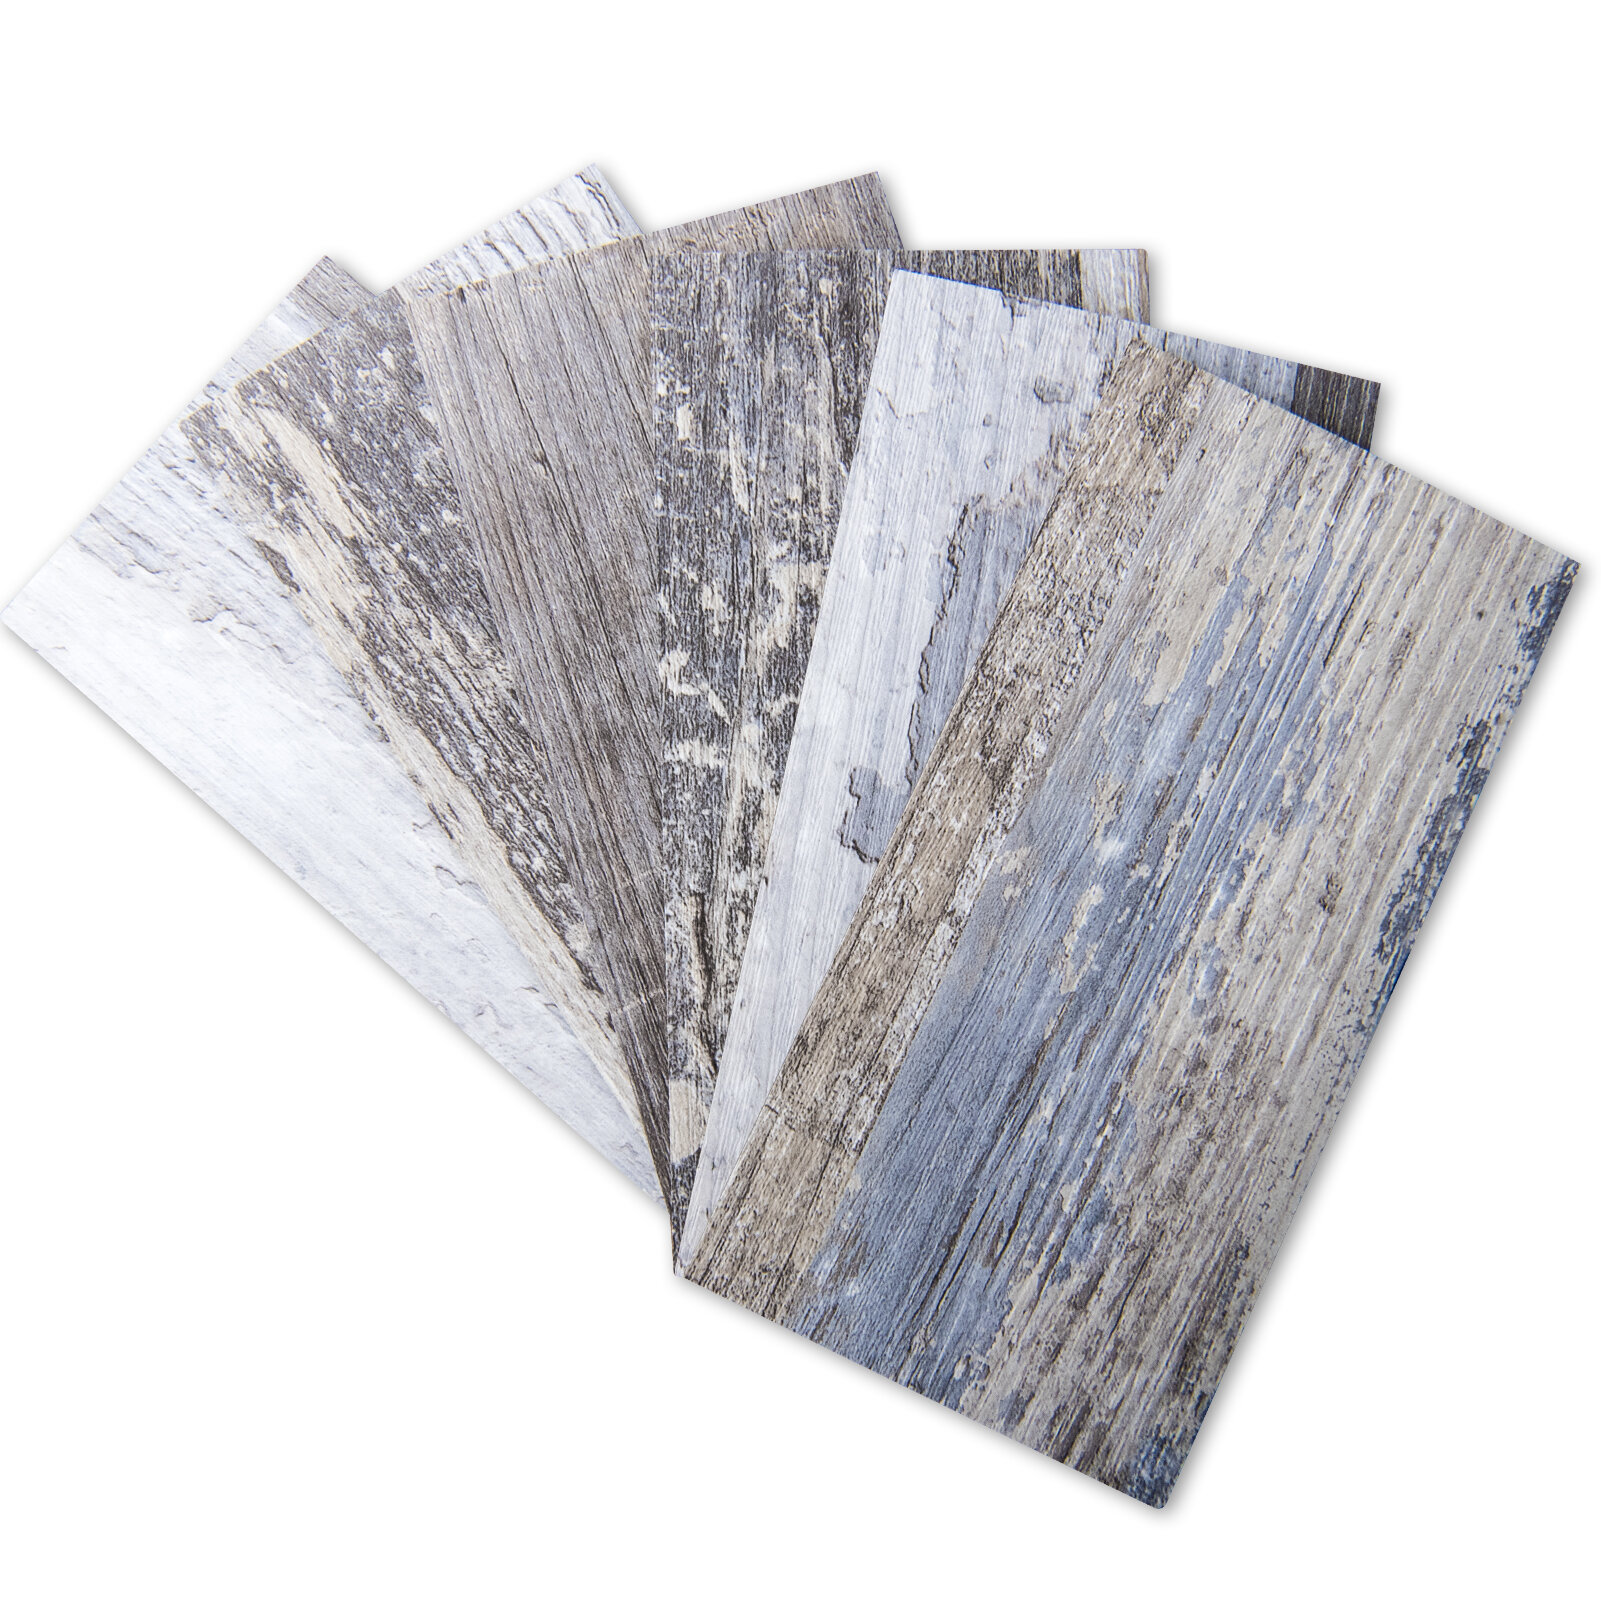 Art3d Stone Gray Peel and Stick Wood Plank for Wall Self-Adhesive